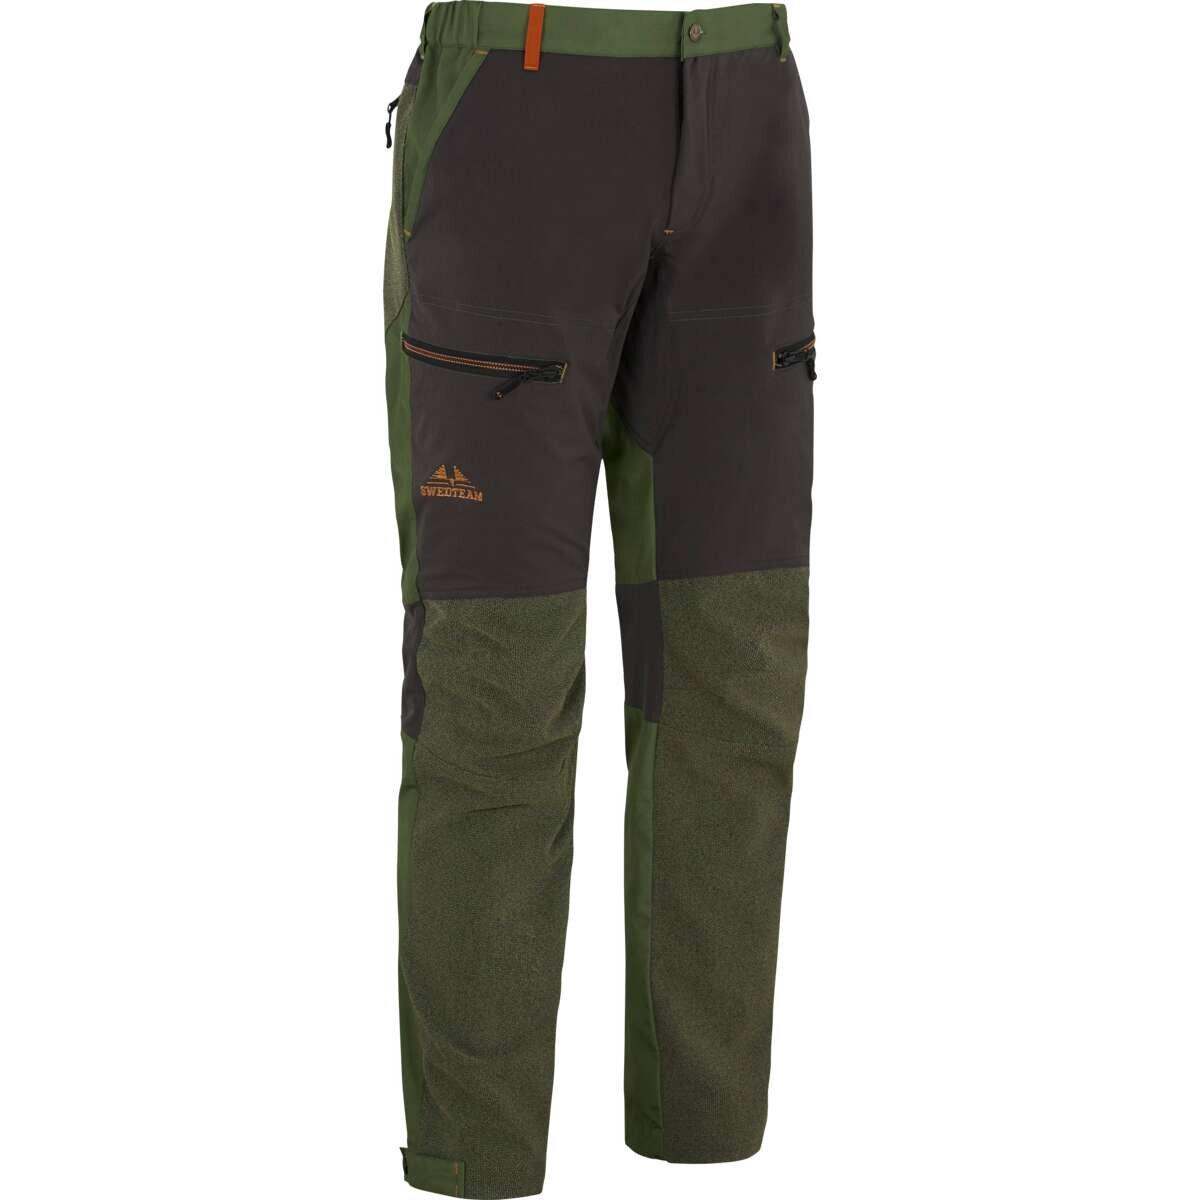 Stretch New Swedteam Hunting Trousers Lynx Light Hunting Green 